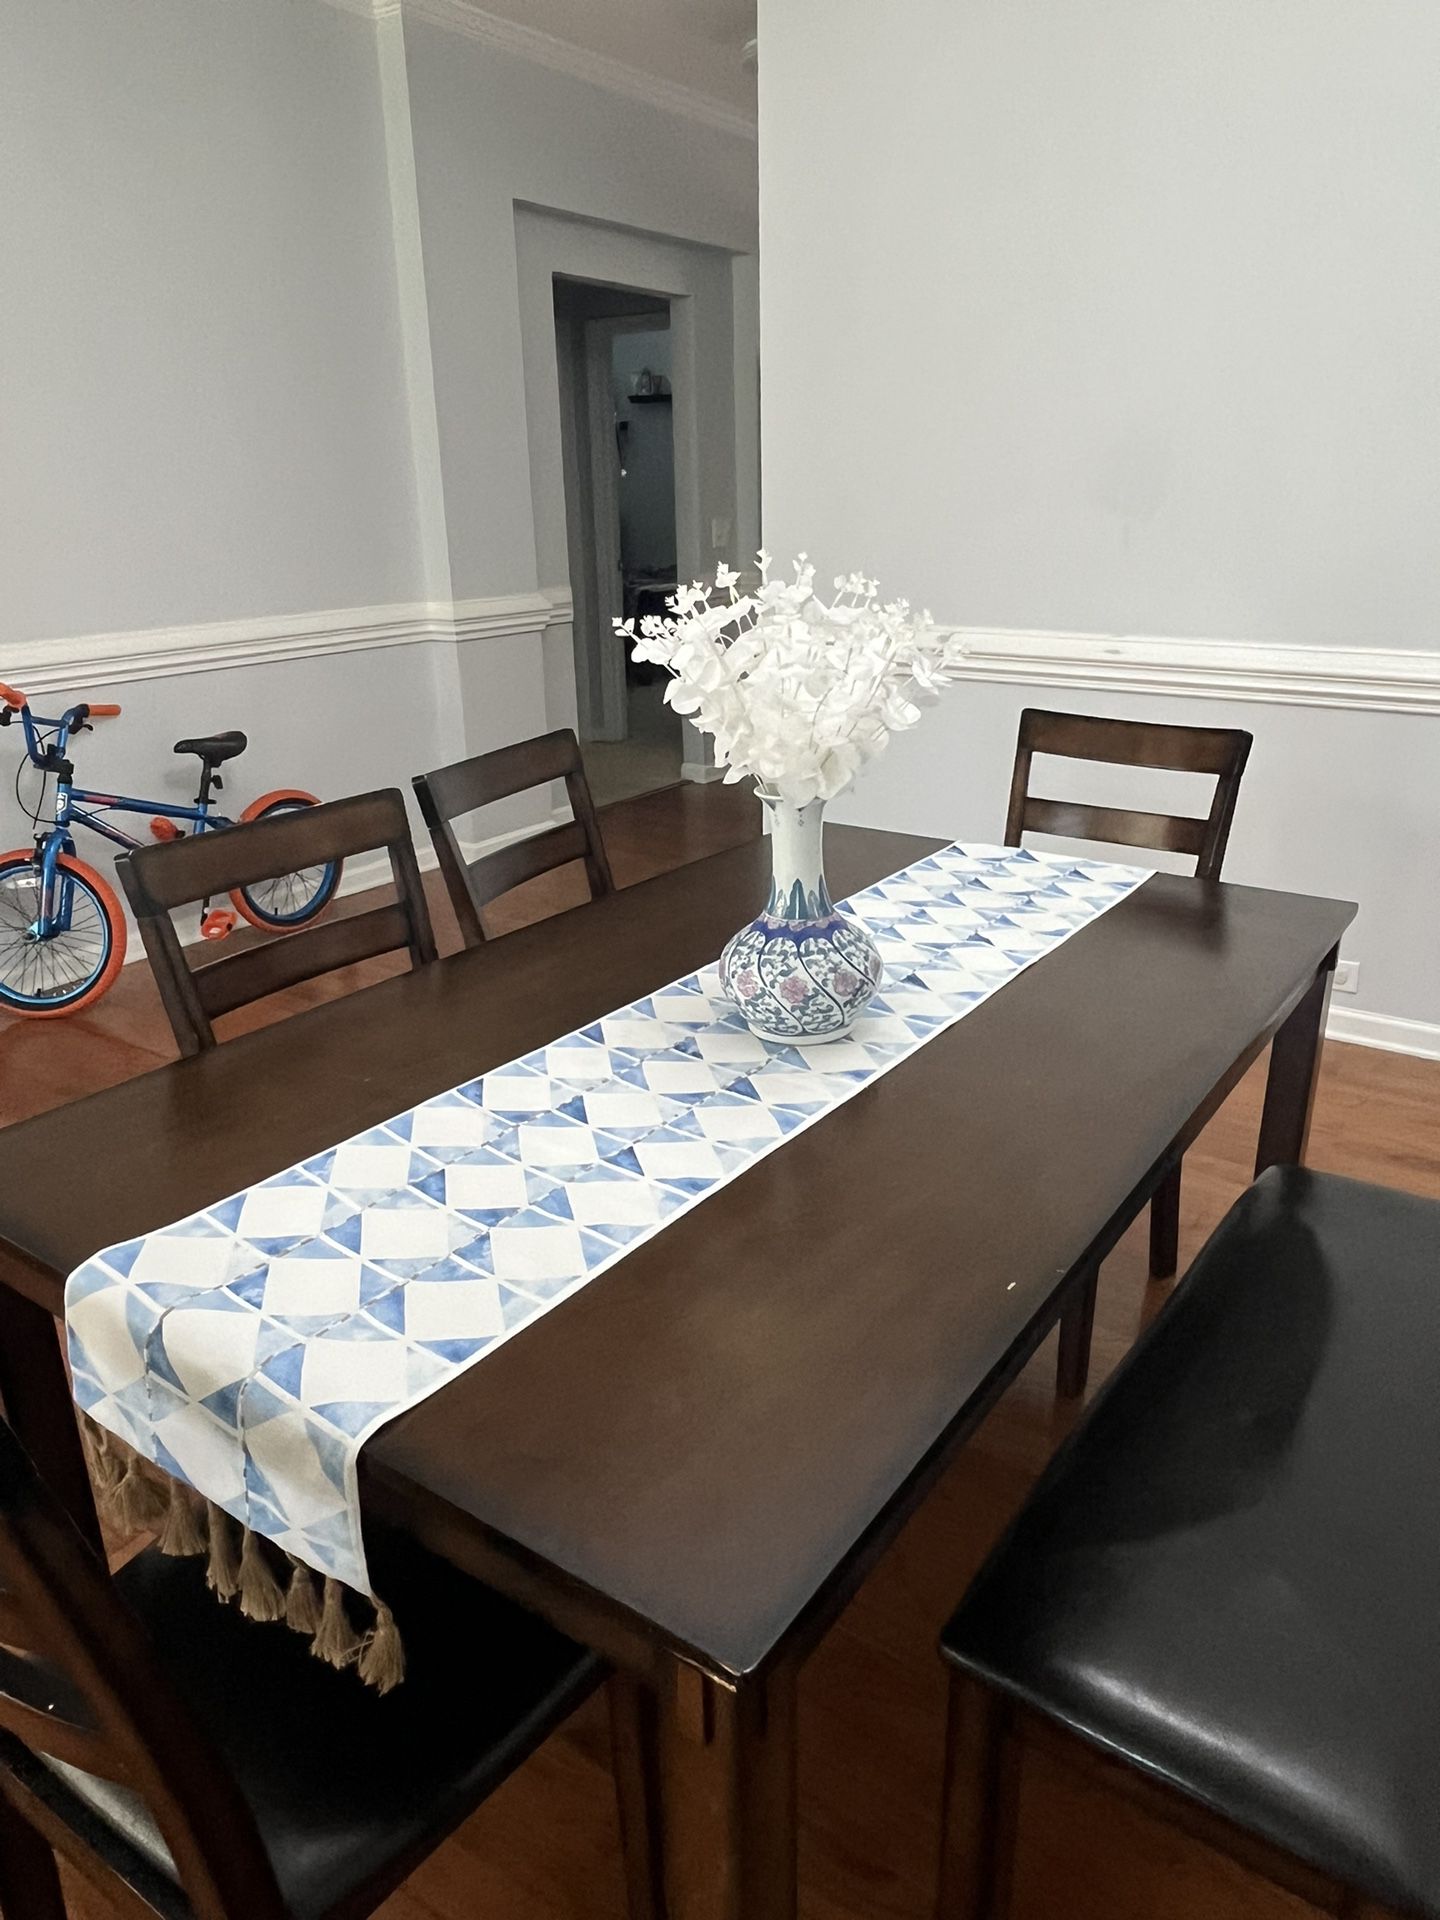 Dinning Table With 4 Chairs And Bench